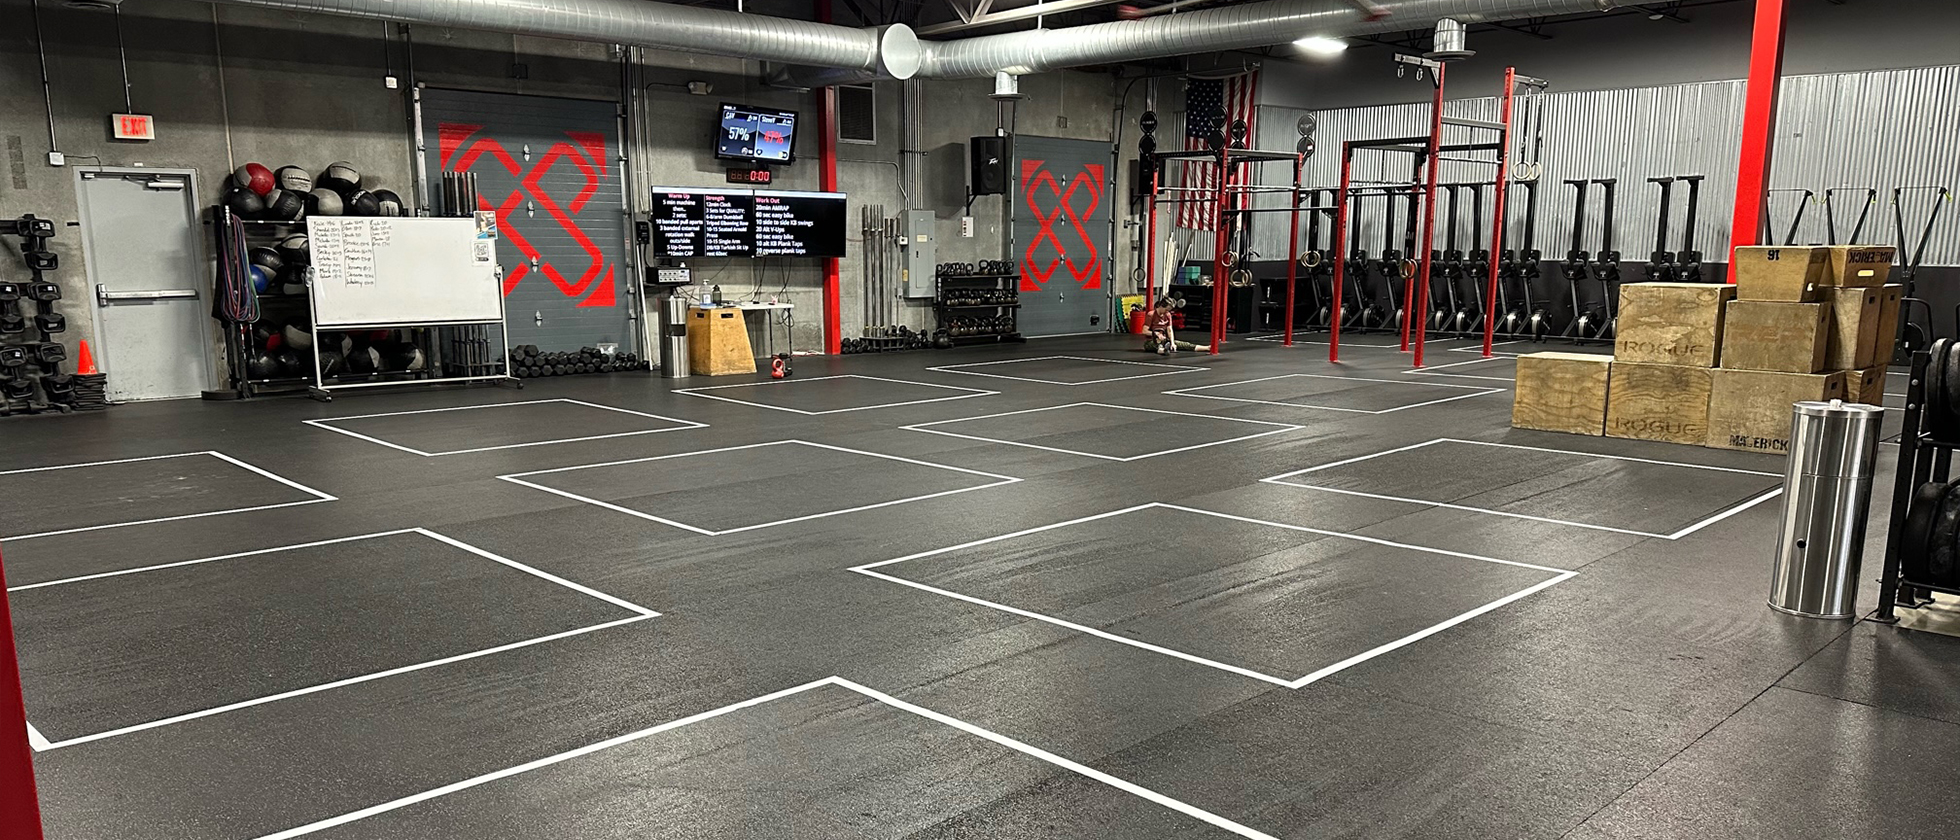 Check Out Our Gym Near Downtown Rochester